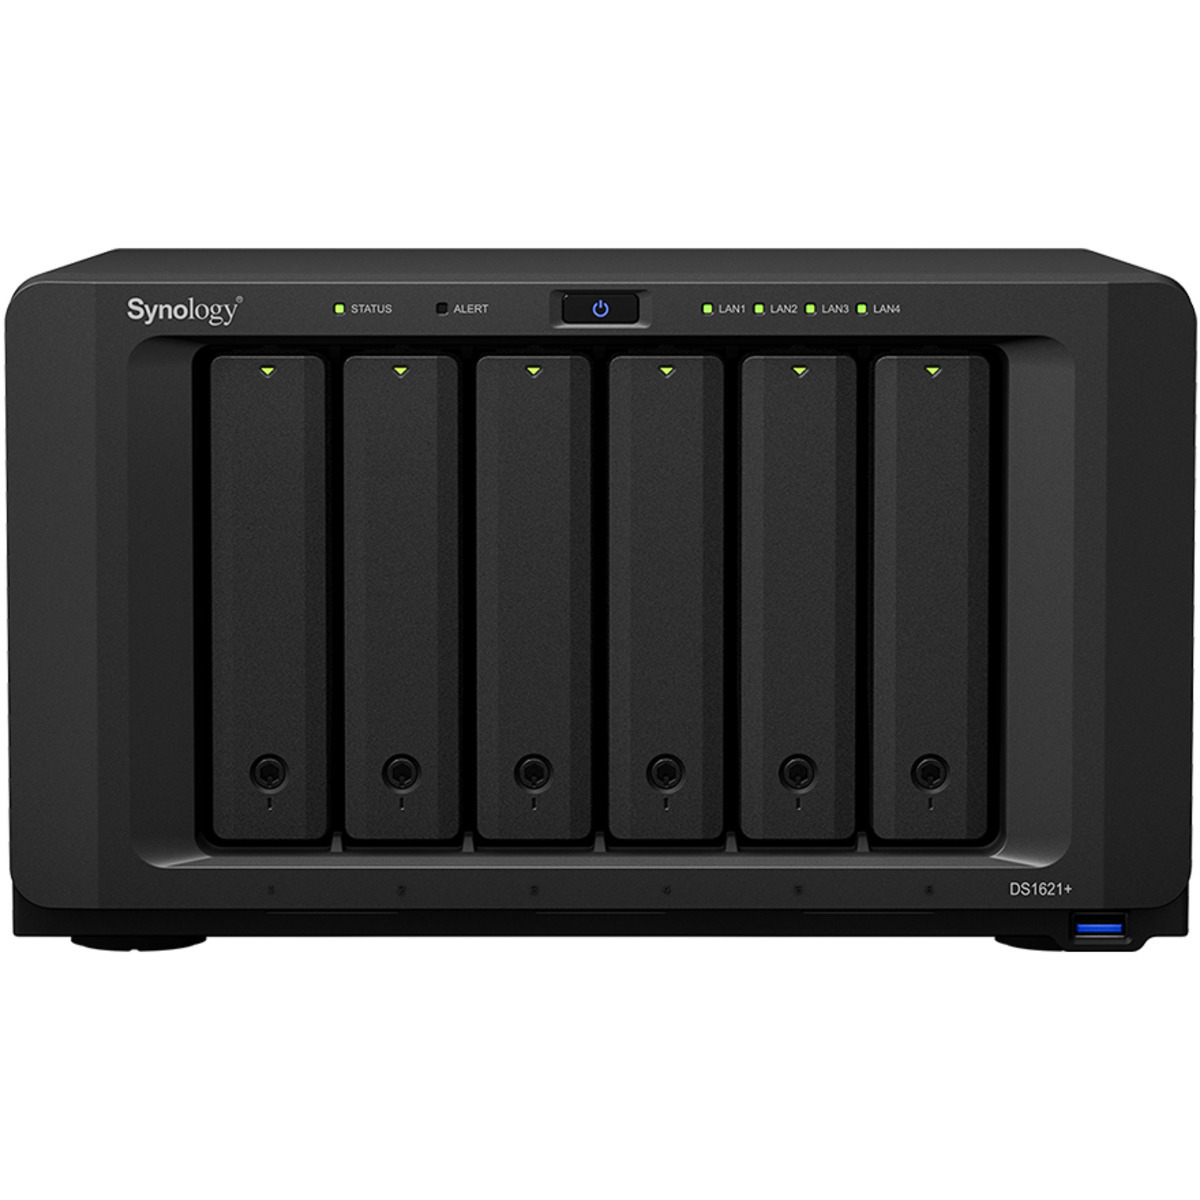 Synology DiskStation DS1621+ 110tb 6-Bay Desktop Multimedia / Power User / Business NAS - Network Attached Storage Device 5x22tb Seagate IronWolf Pro ST22000NT001 3.5 7200rpm SATA 6Gb/s HDD NAS Class Drives Installed - Burn-In Tested - FREE RAM UPGRADE DiskStation DS1621+